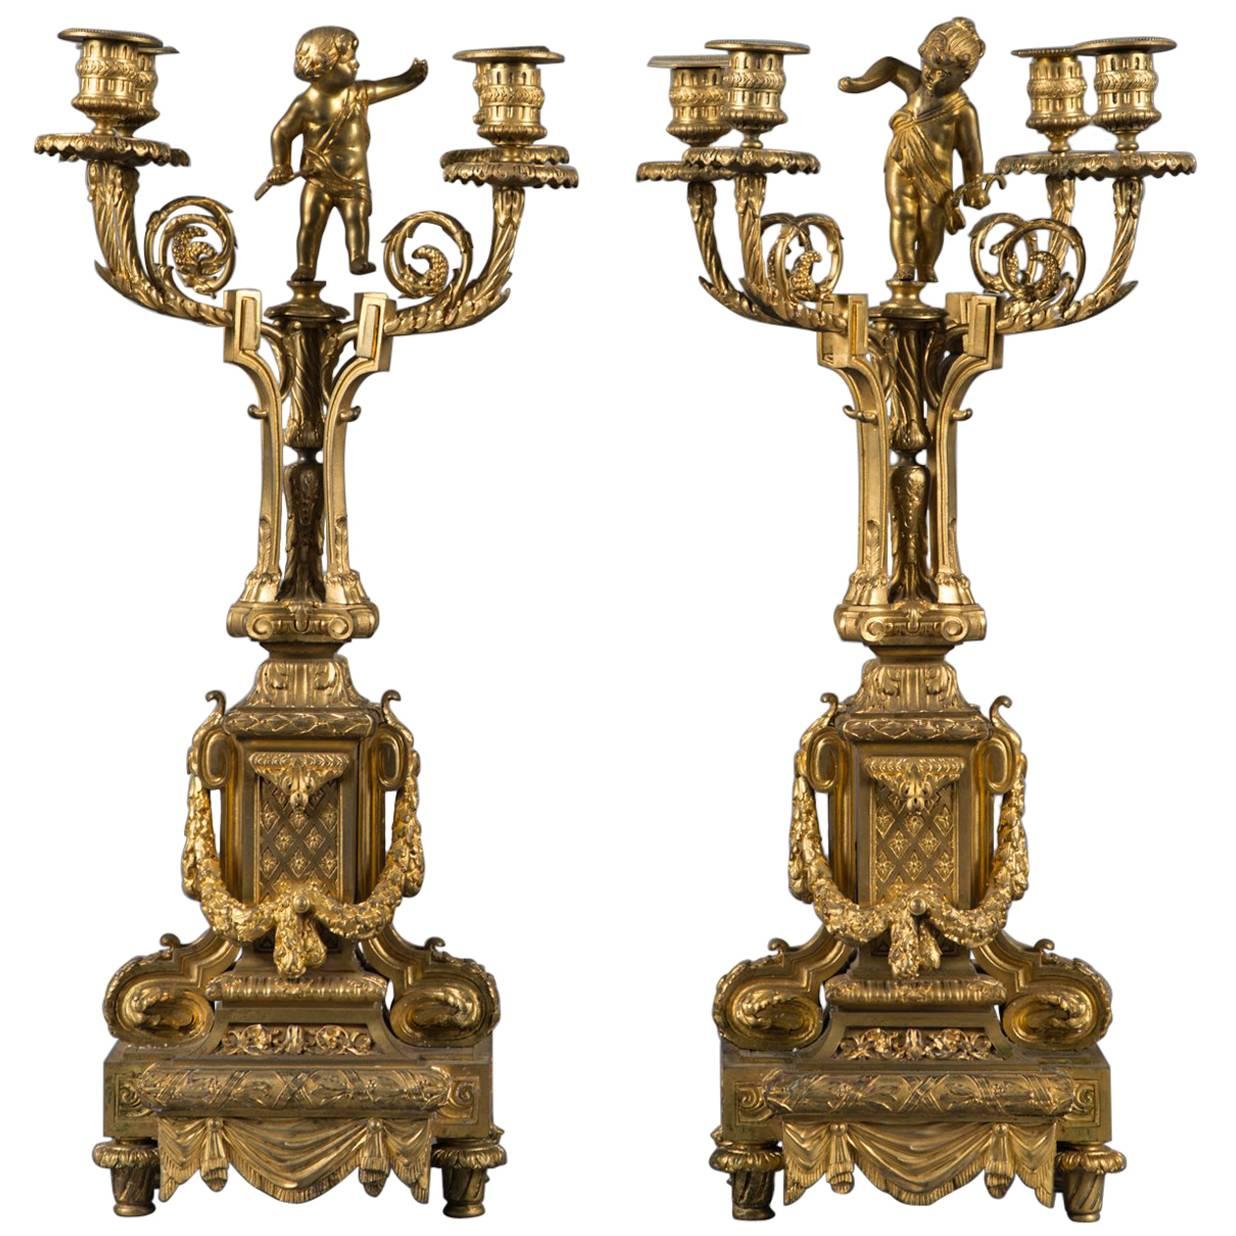 Pair of 19th Century French Gilt Bronze Four-Branch Figural Candelabras